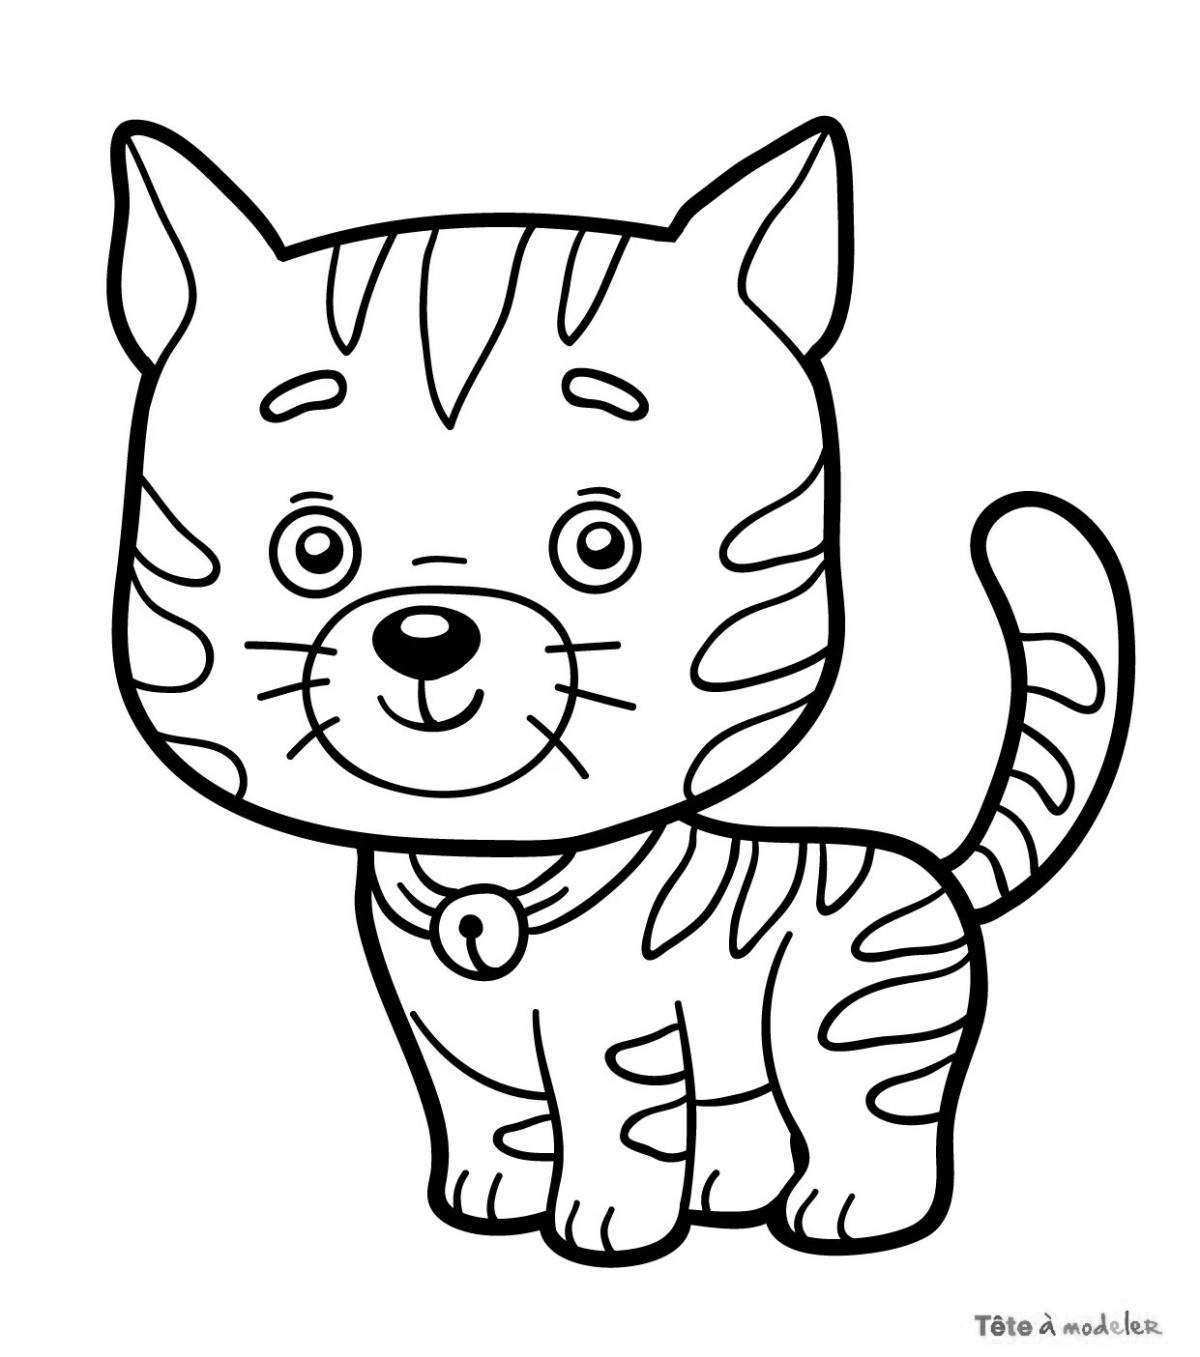 Coloring page graceful red cat